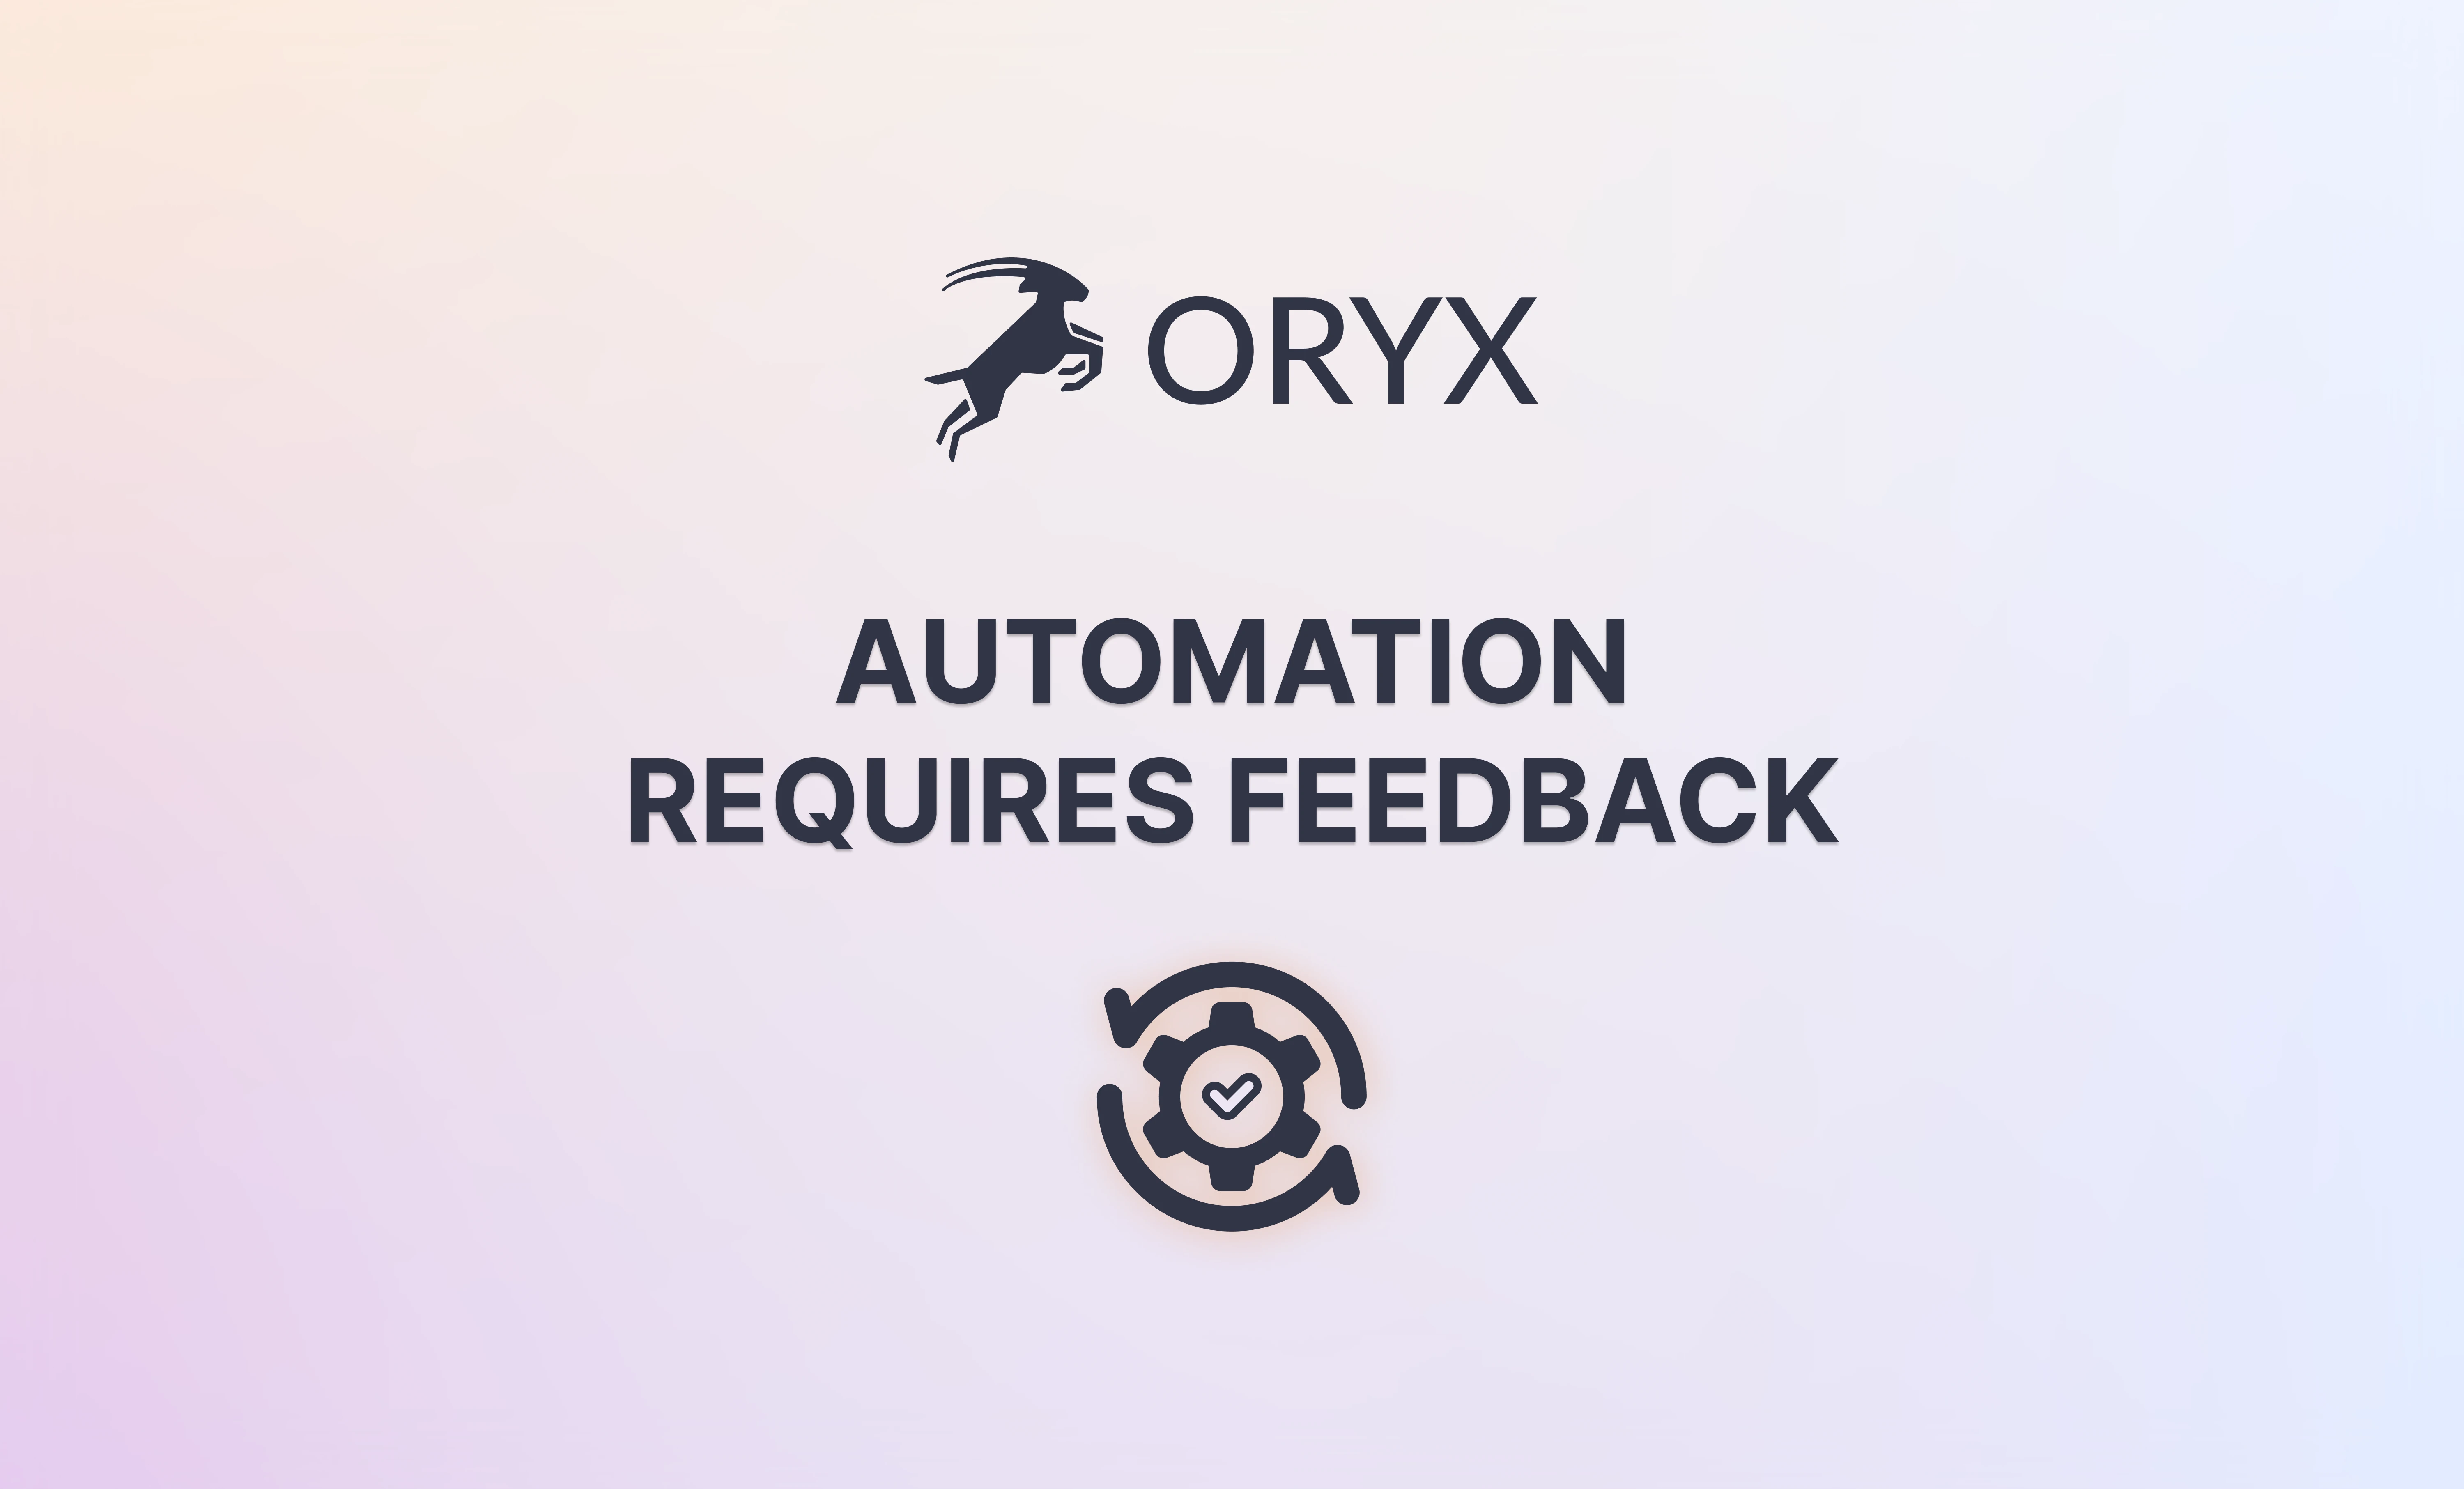 Automation requires feedback